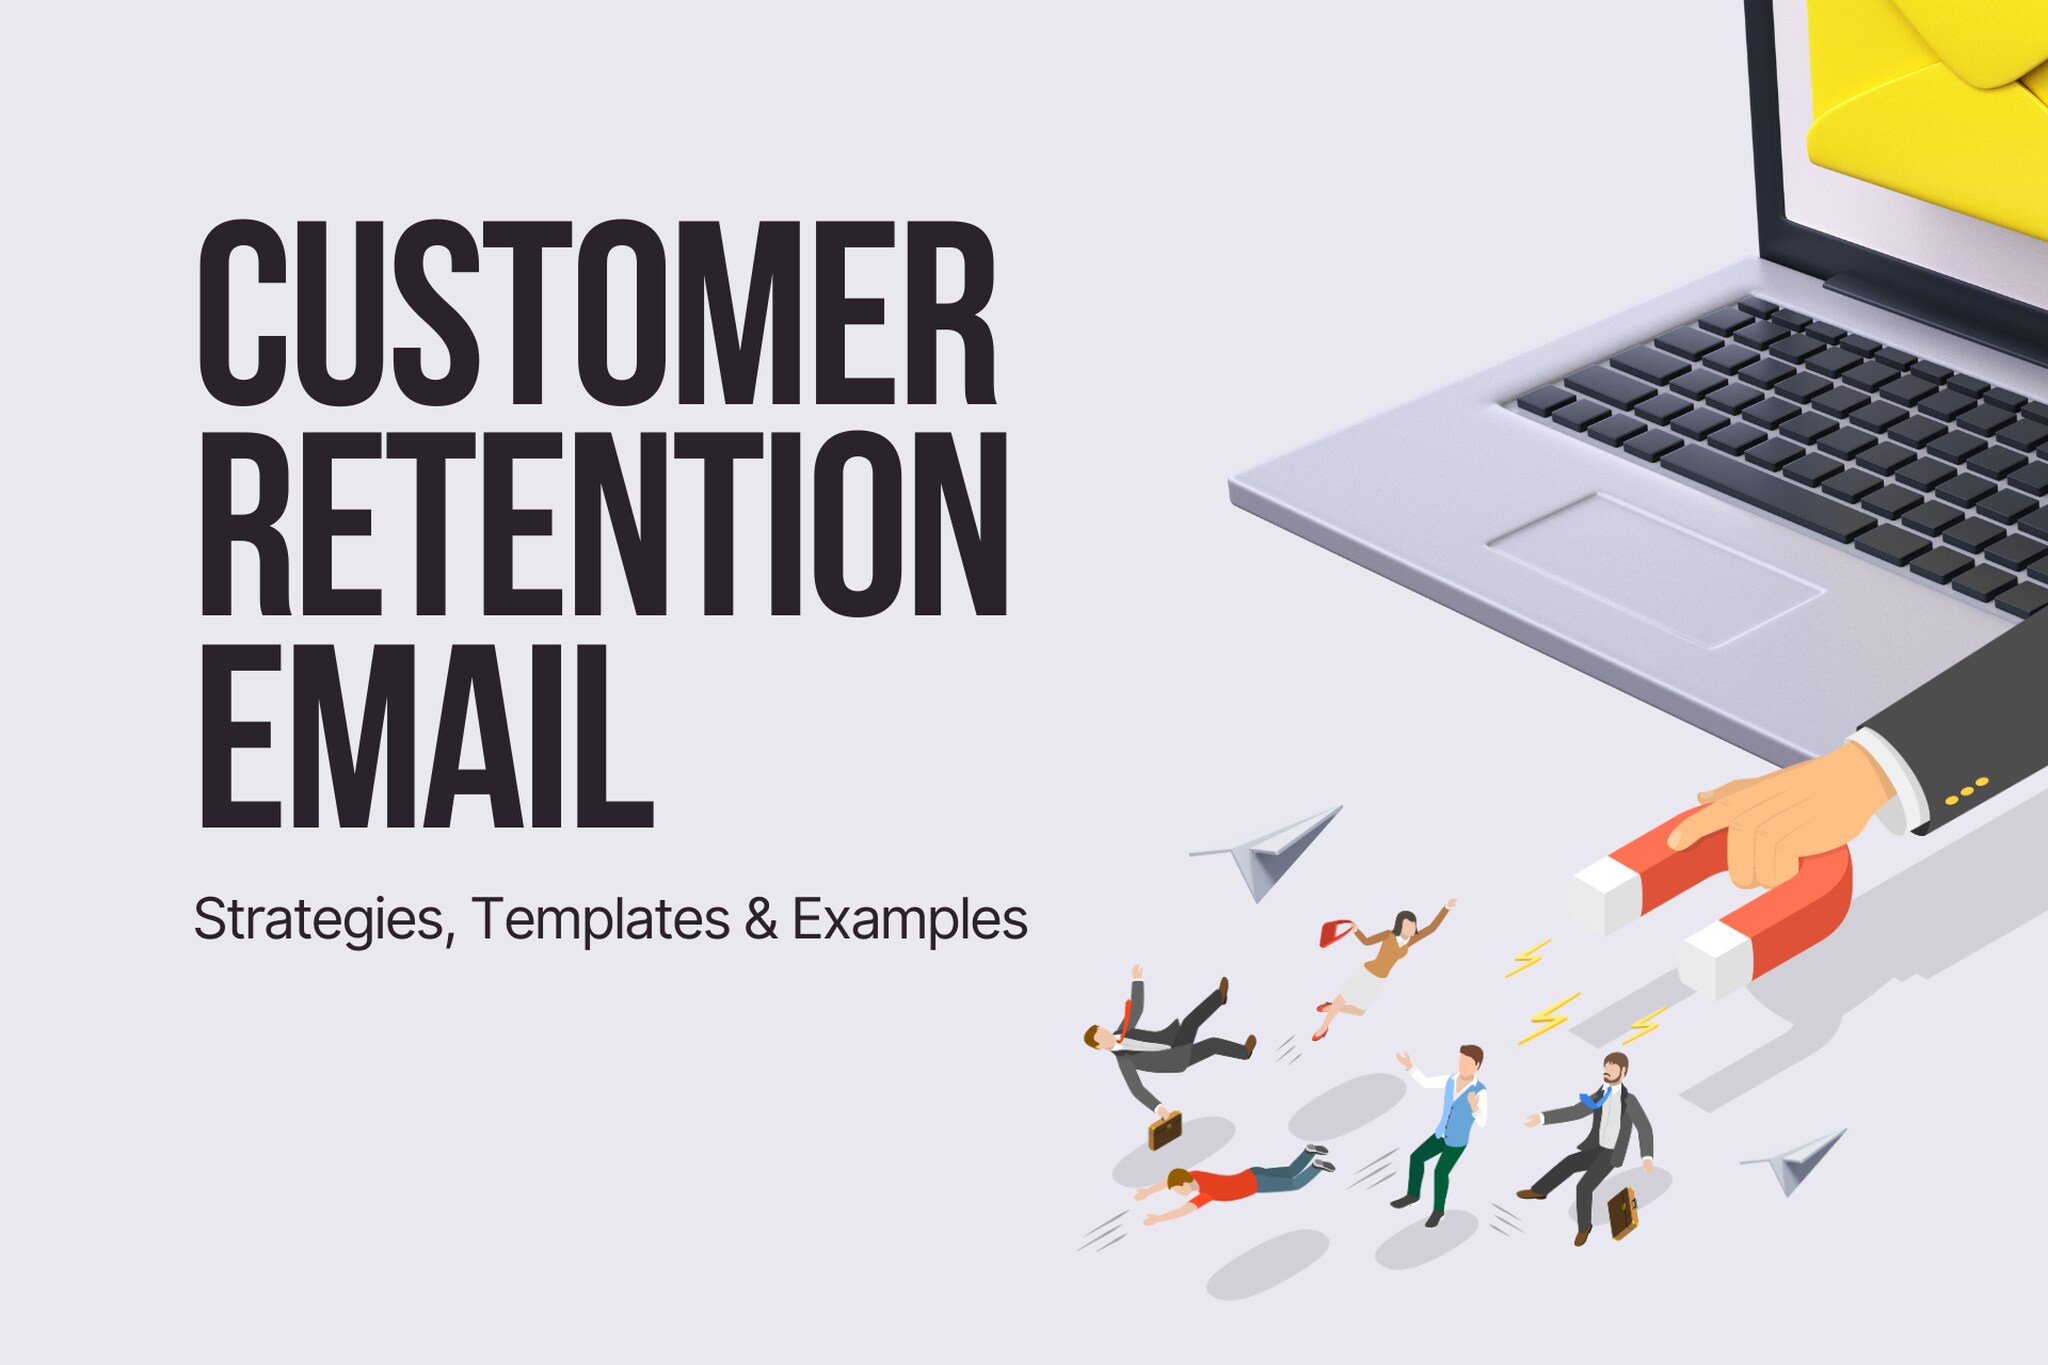 Customer Retention Email Strategies, Templates & Examples